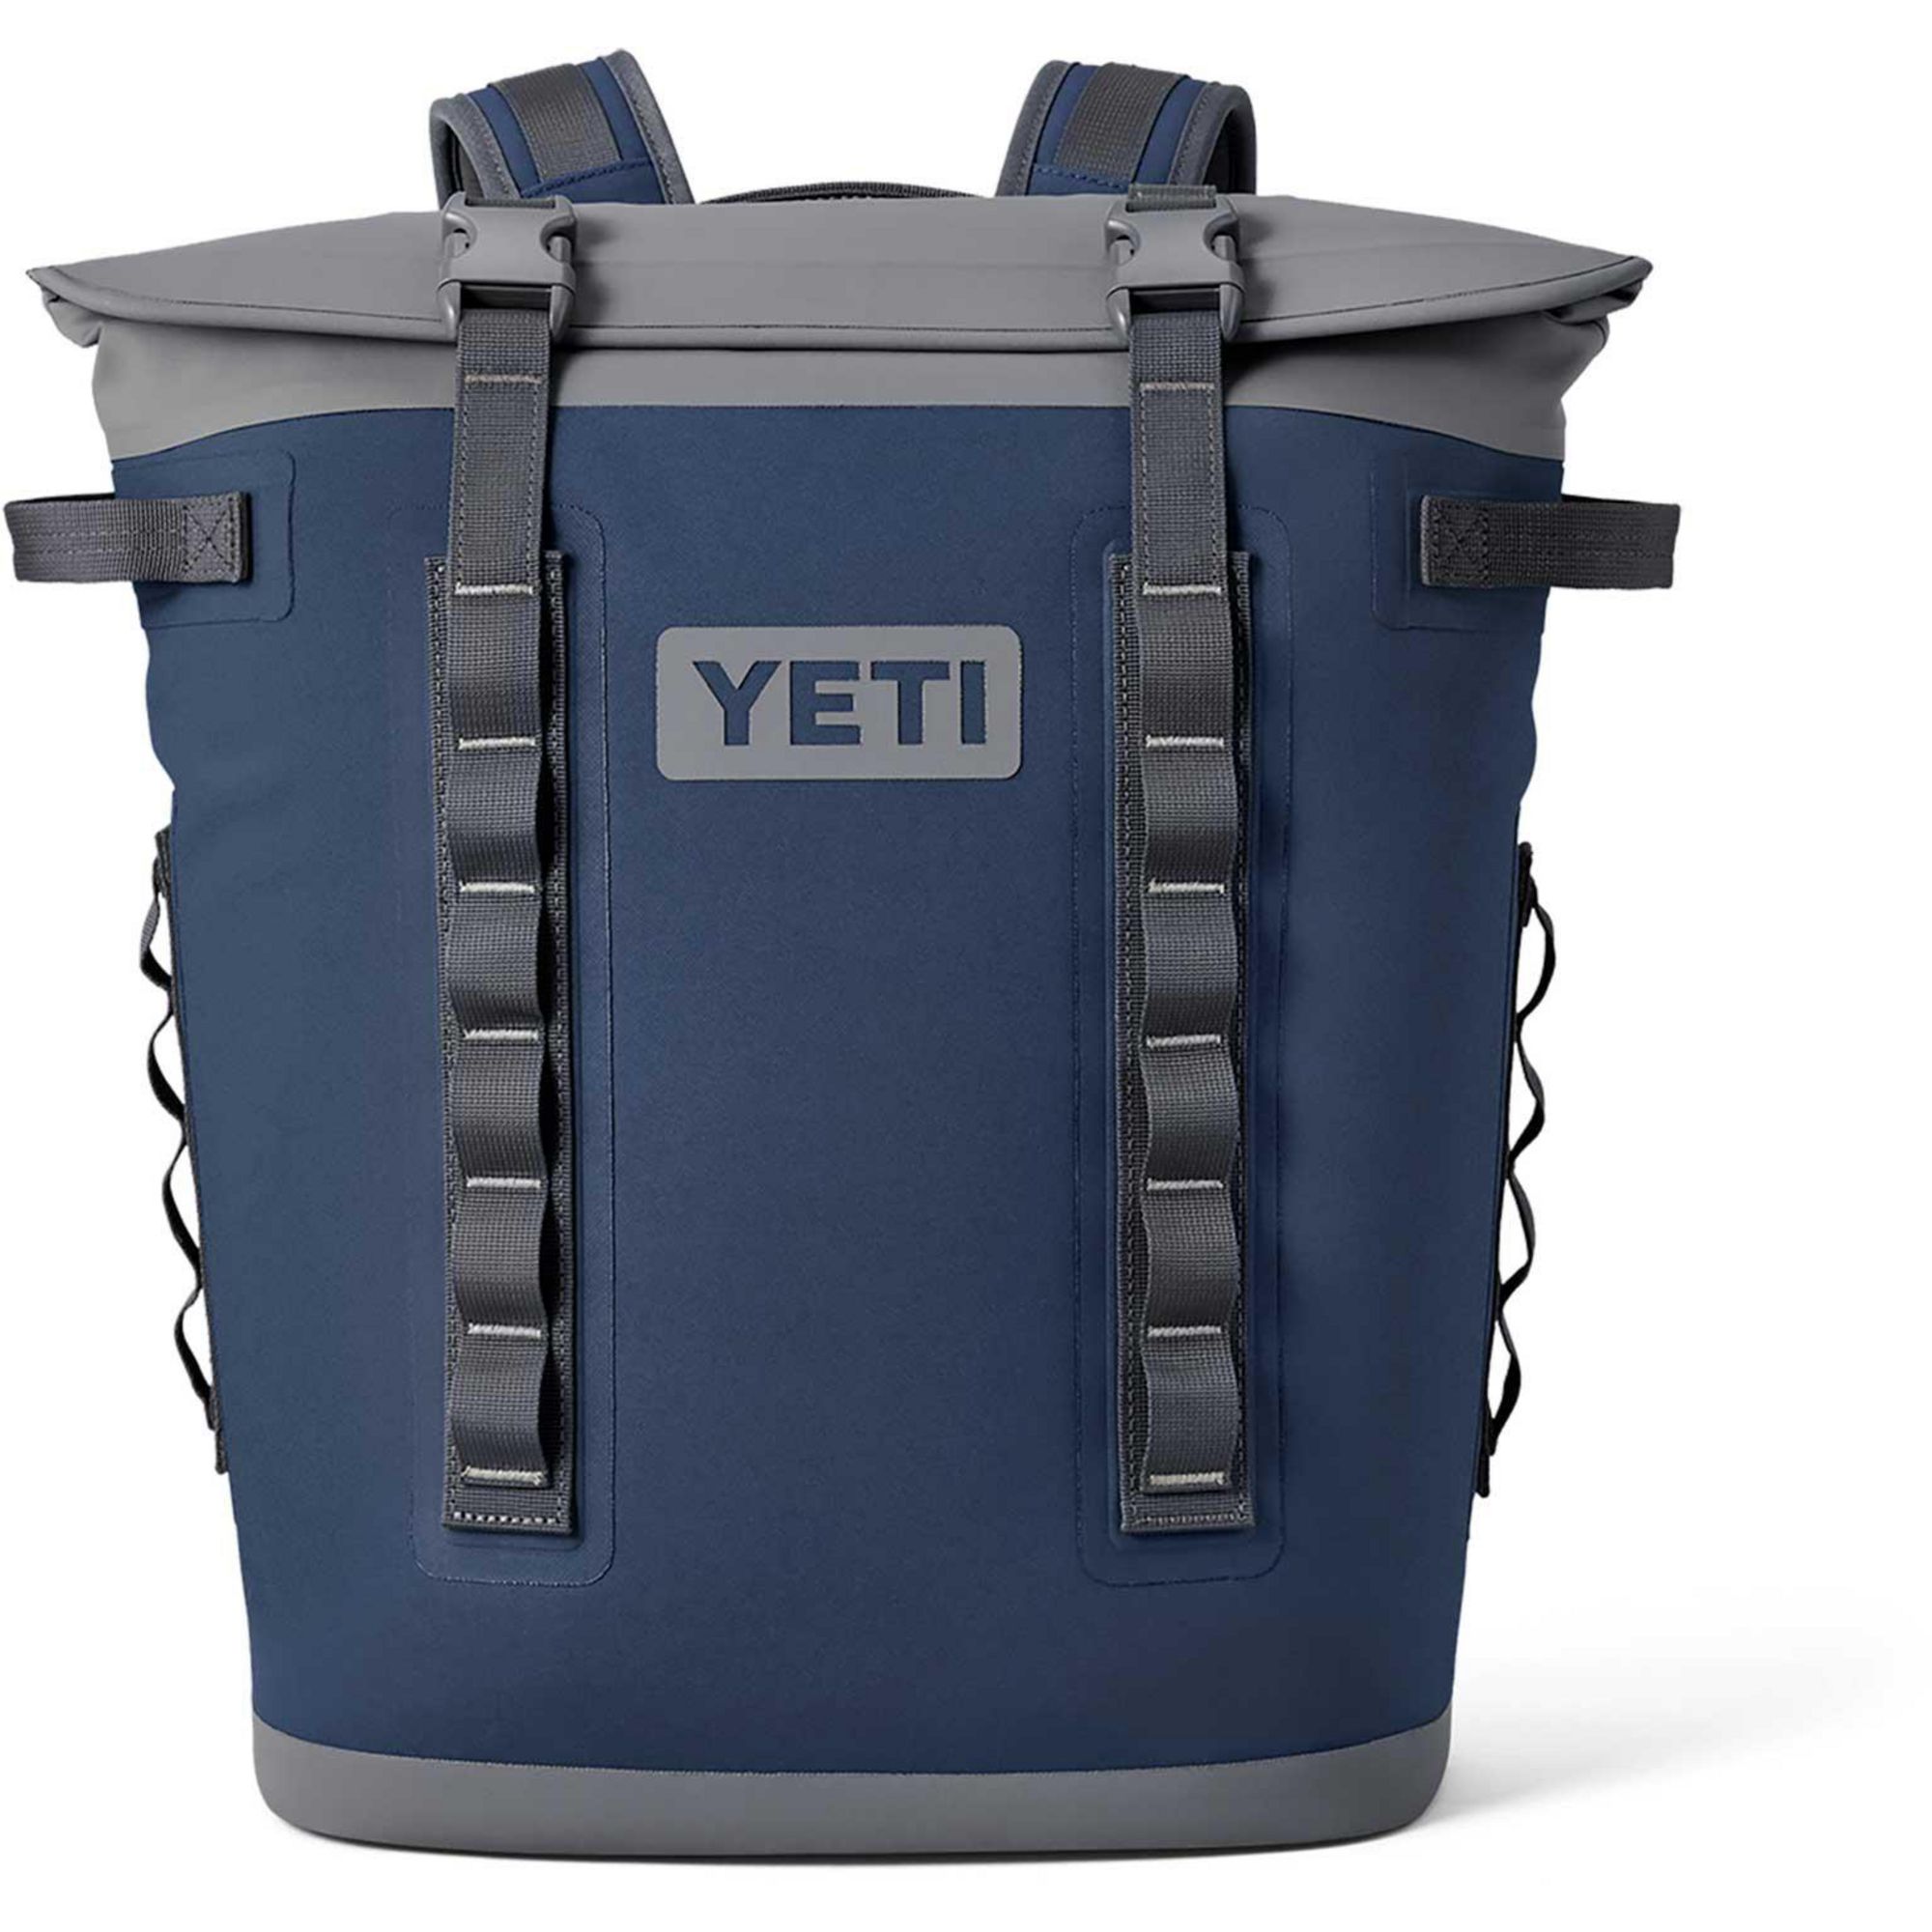 The Yeti Hopper M20 Backpack Is Your Beach Trip BFF